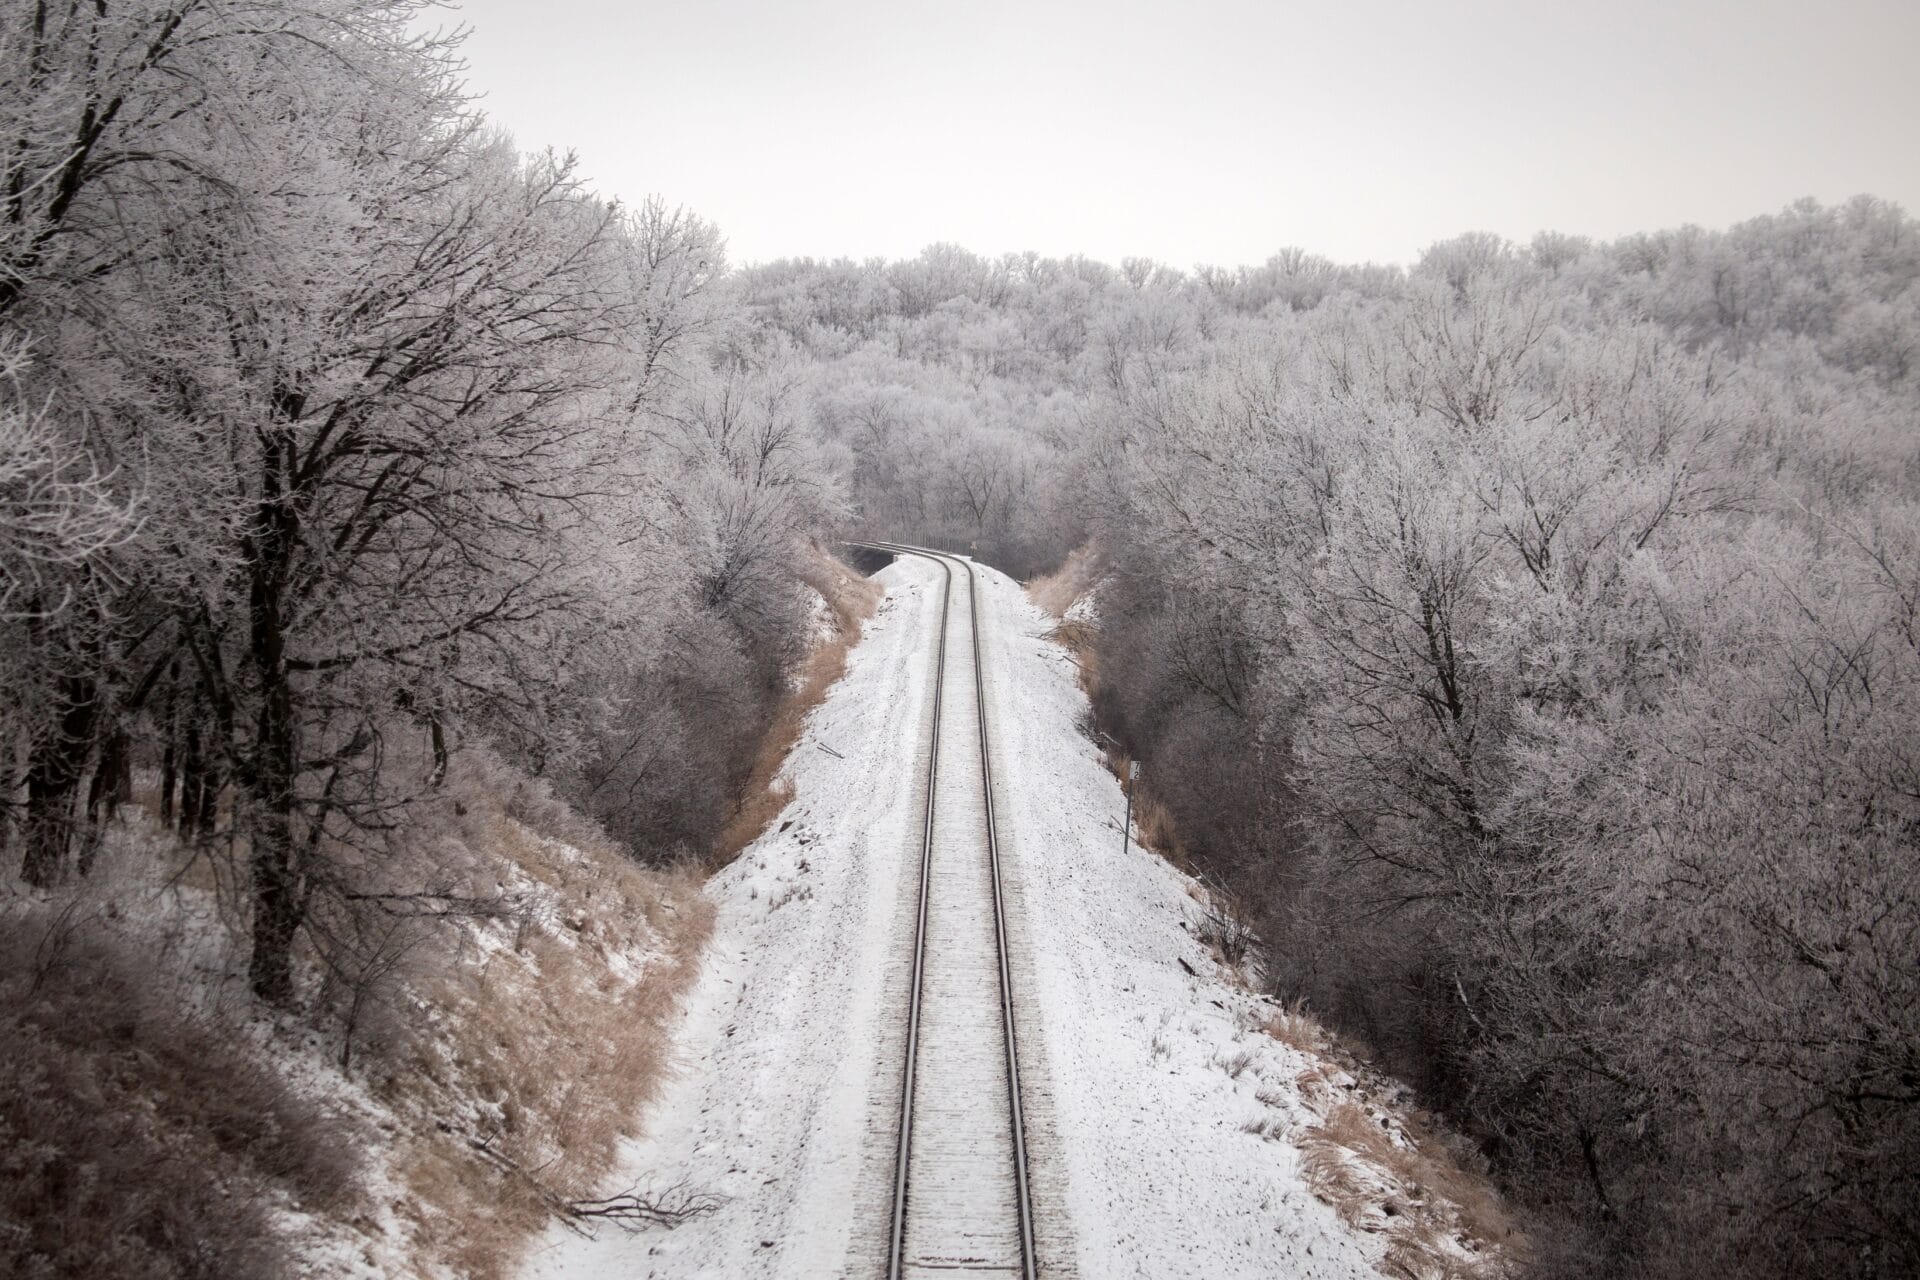 Frosted trees lining Train tracks at Camden.